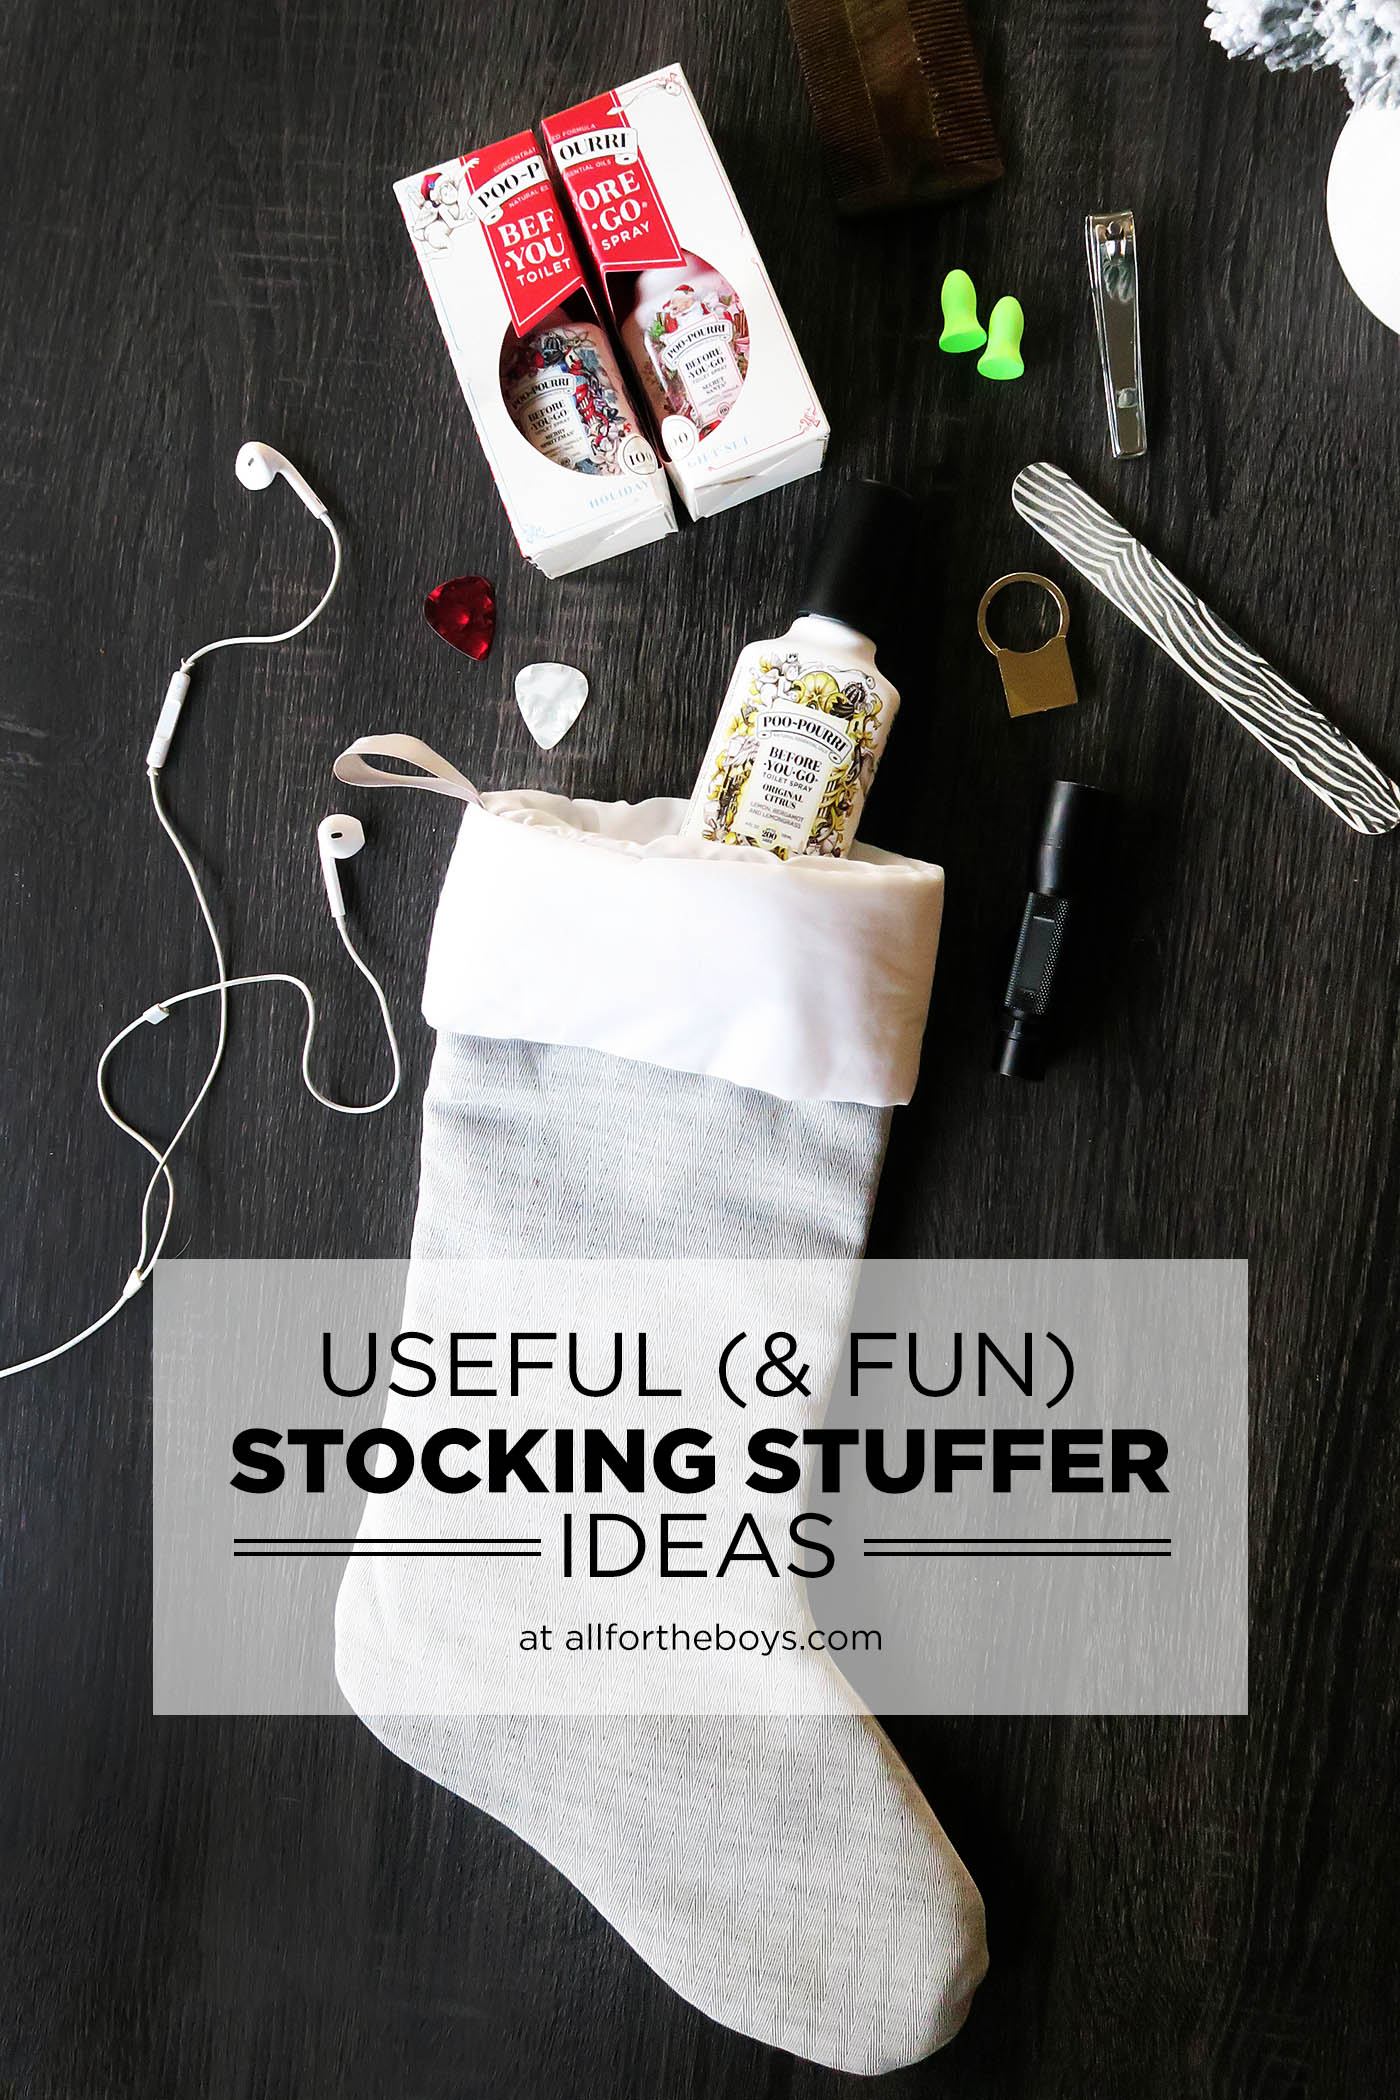 Fun and USEFUL stocking stuffer ideas for everyone on your list